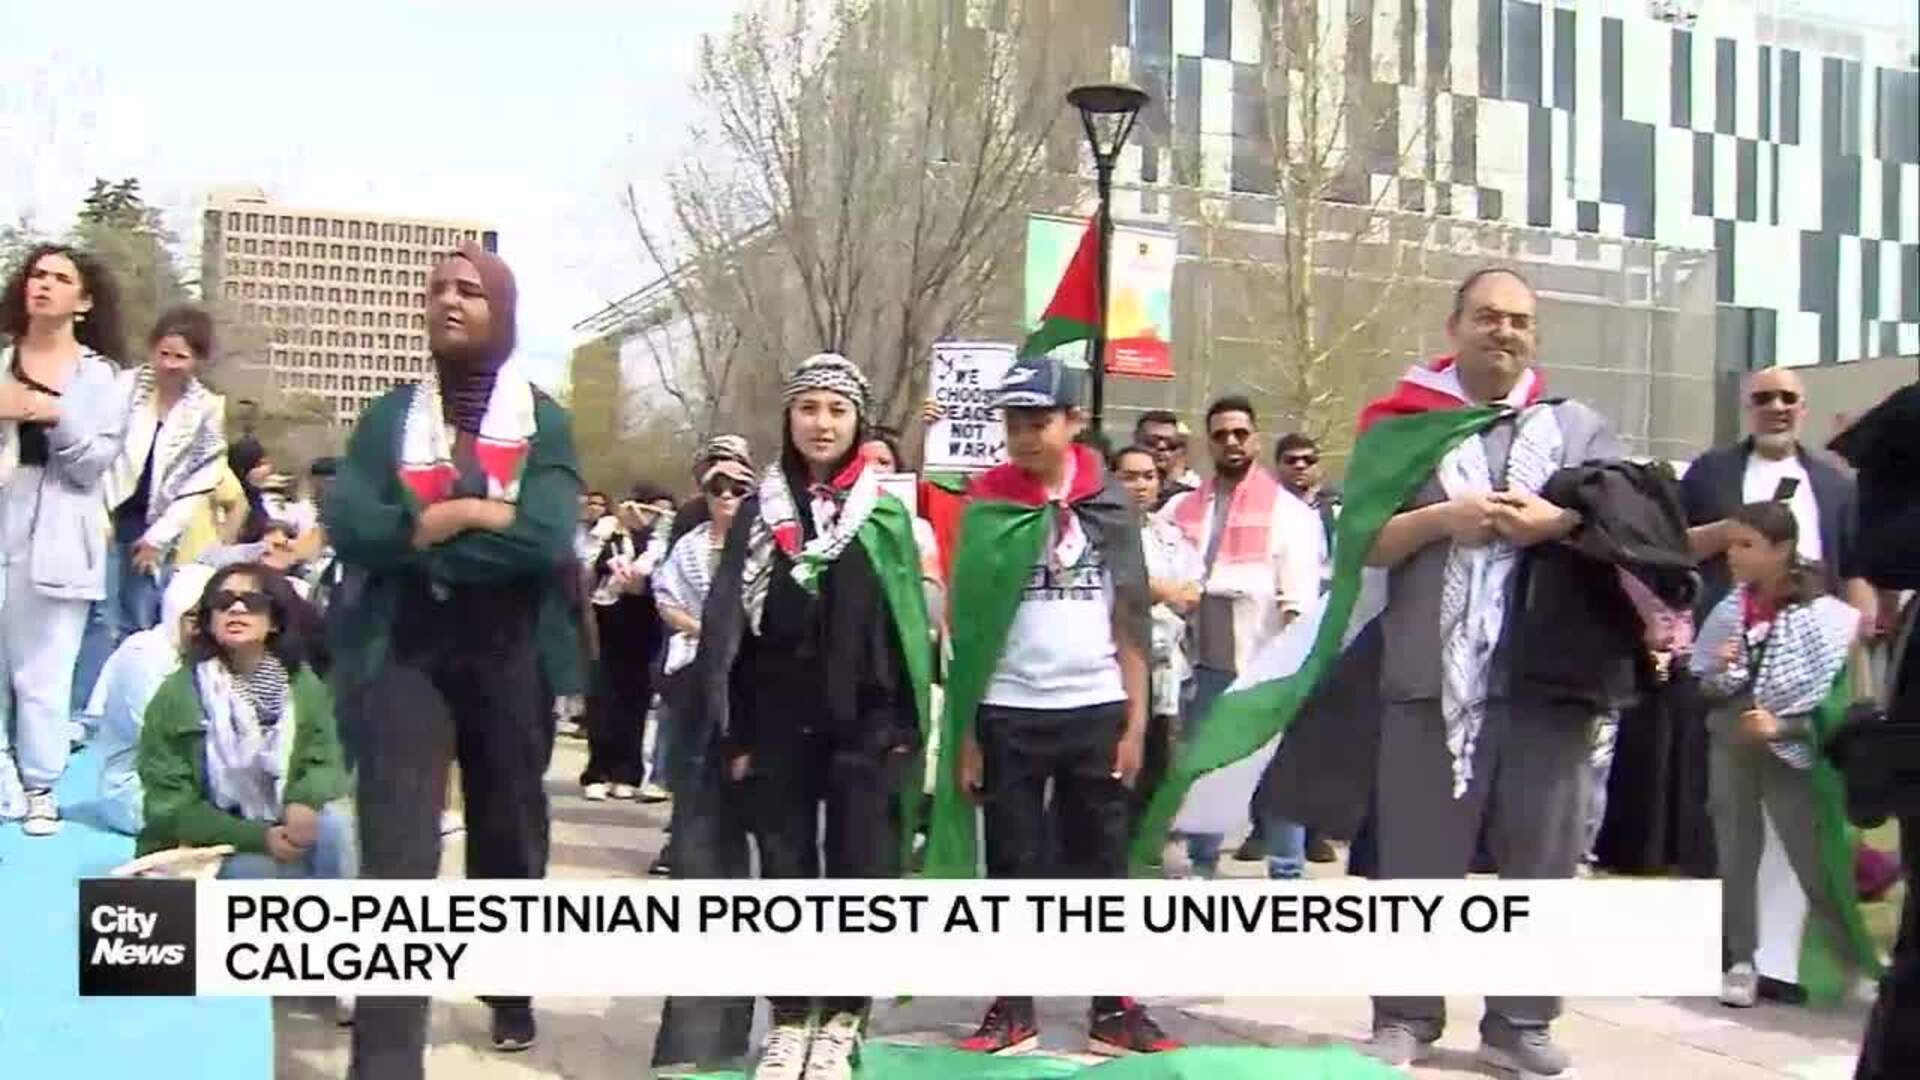 Pro-Palestinian Protest at the University of Calgary